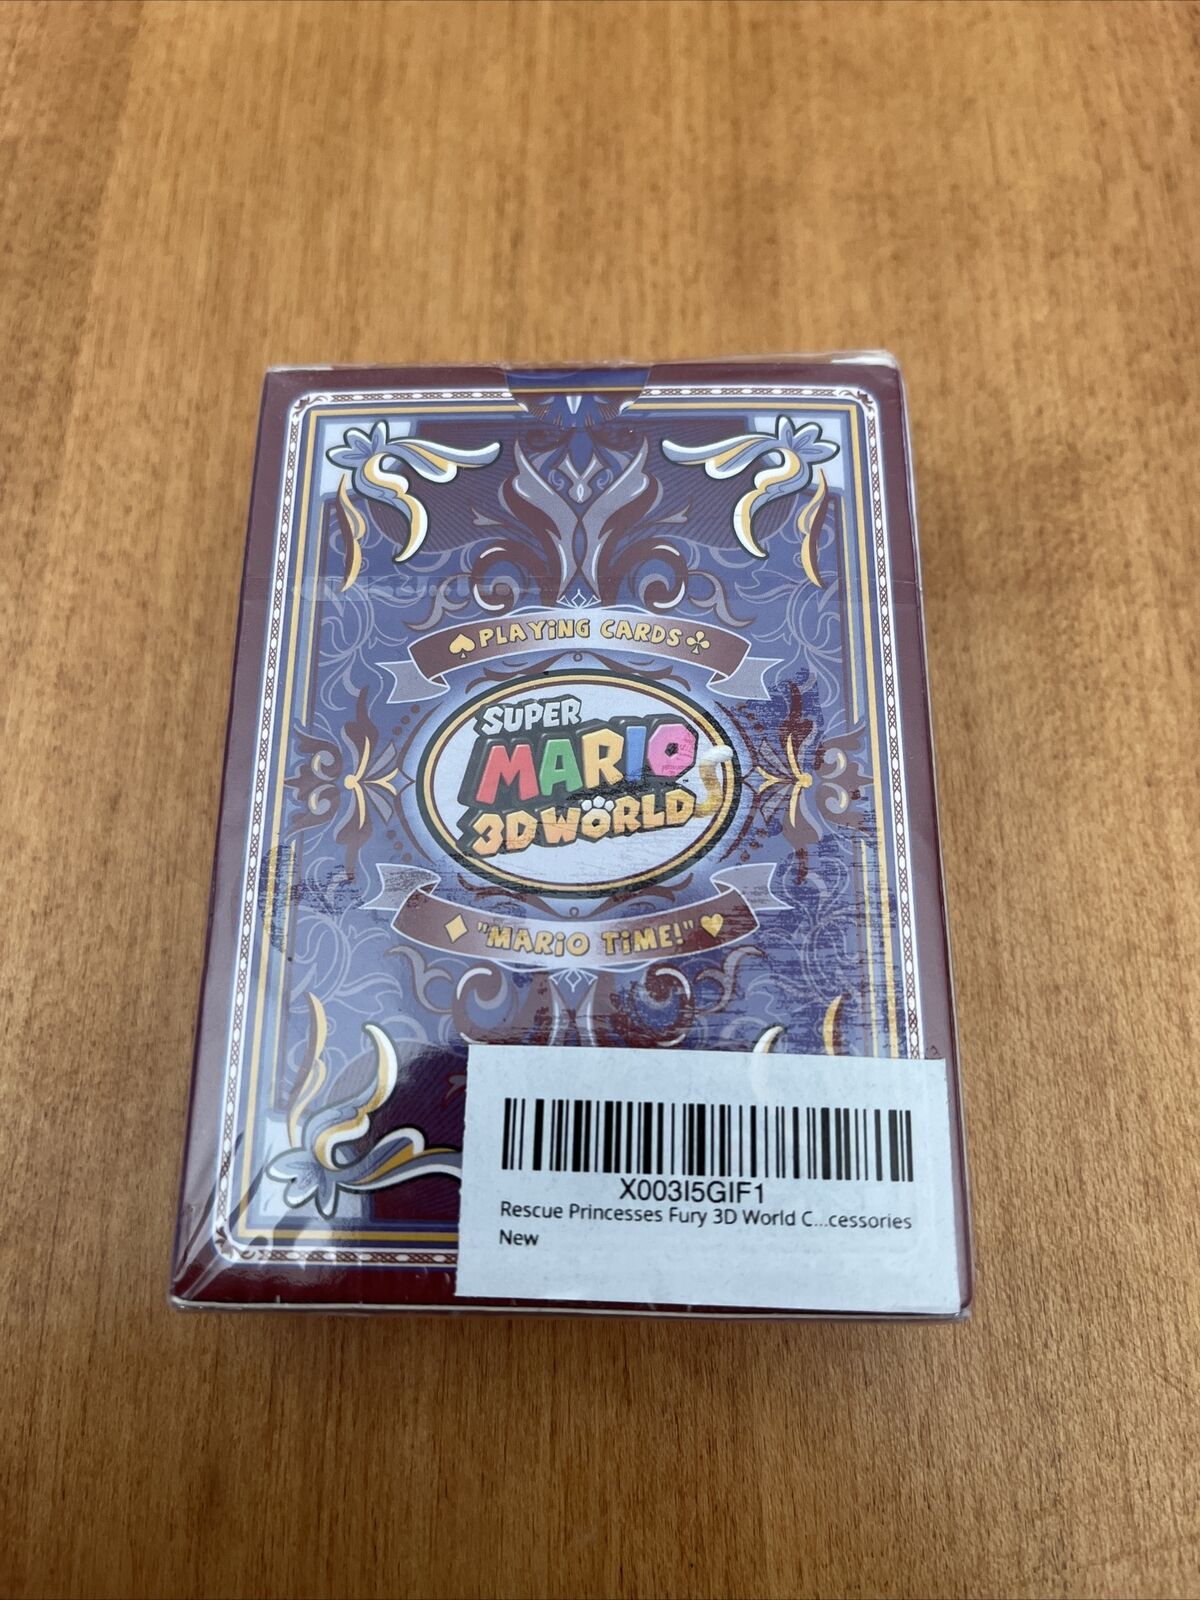 Super Mario 3D World Promotional Playing Cards NINTENDO SUPER MARIO BROTHERS